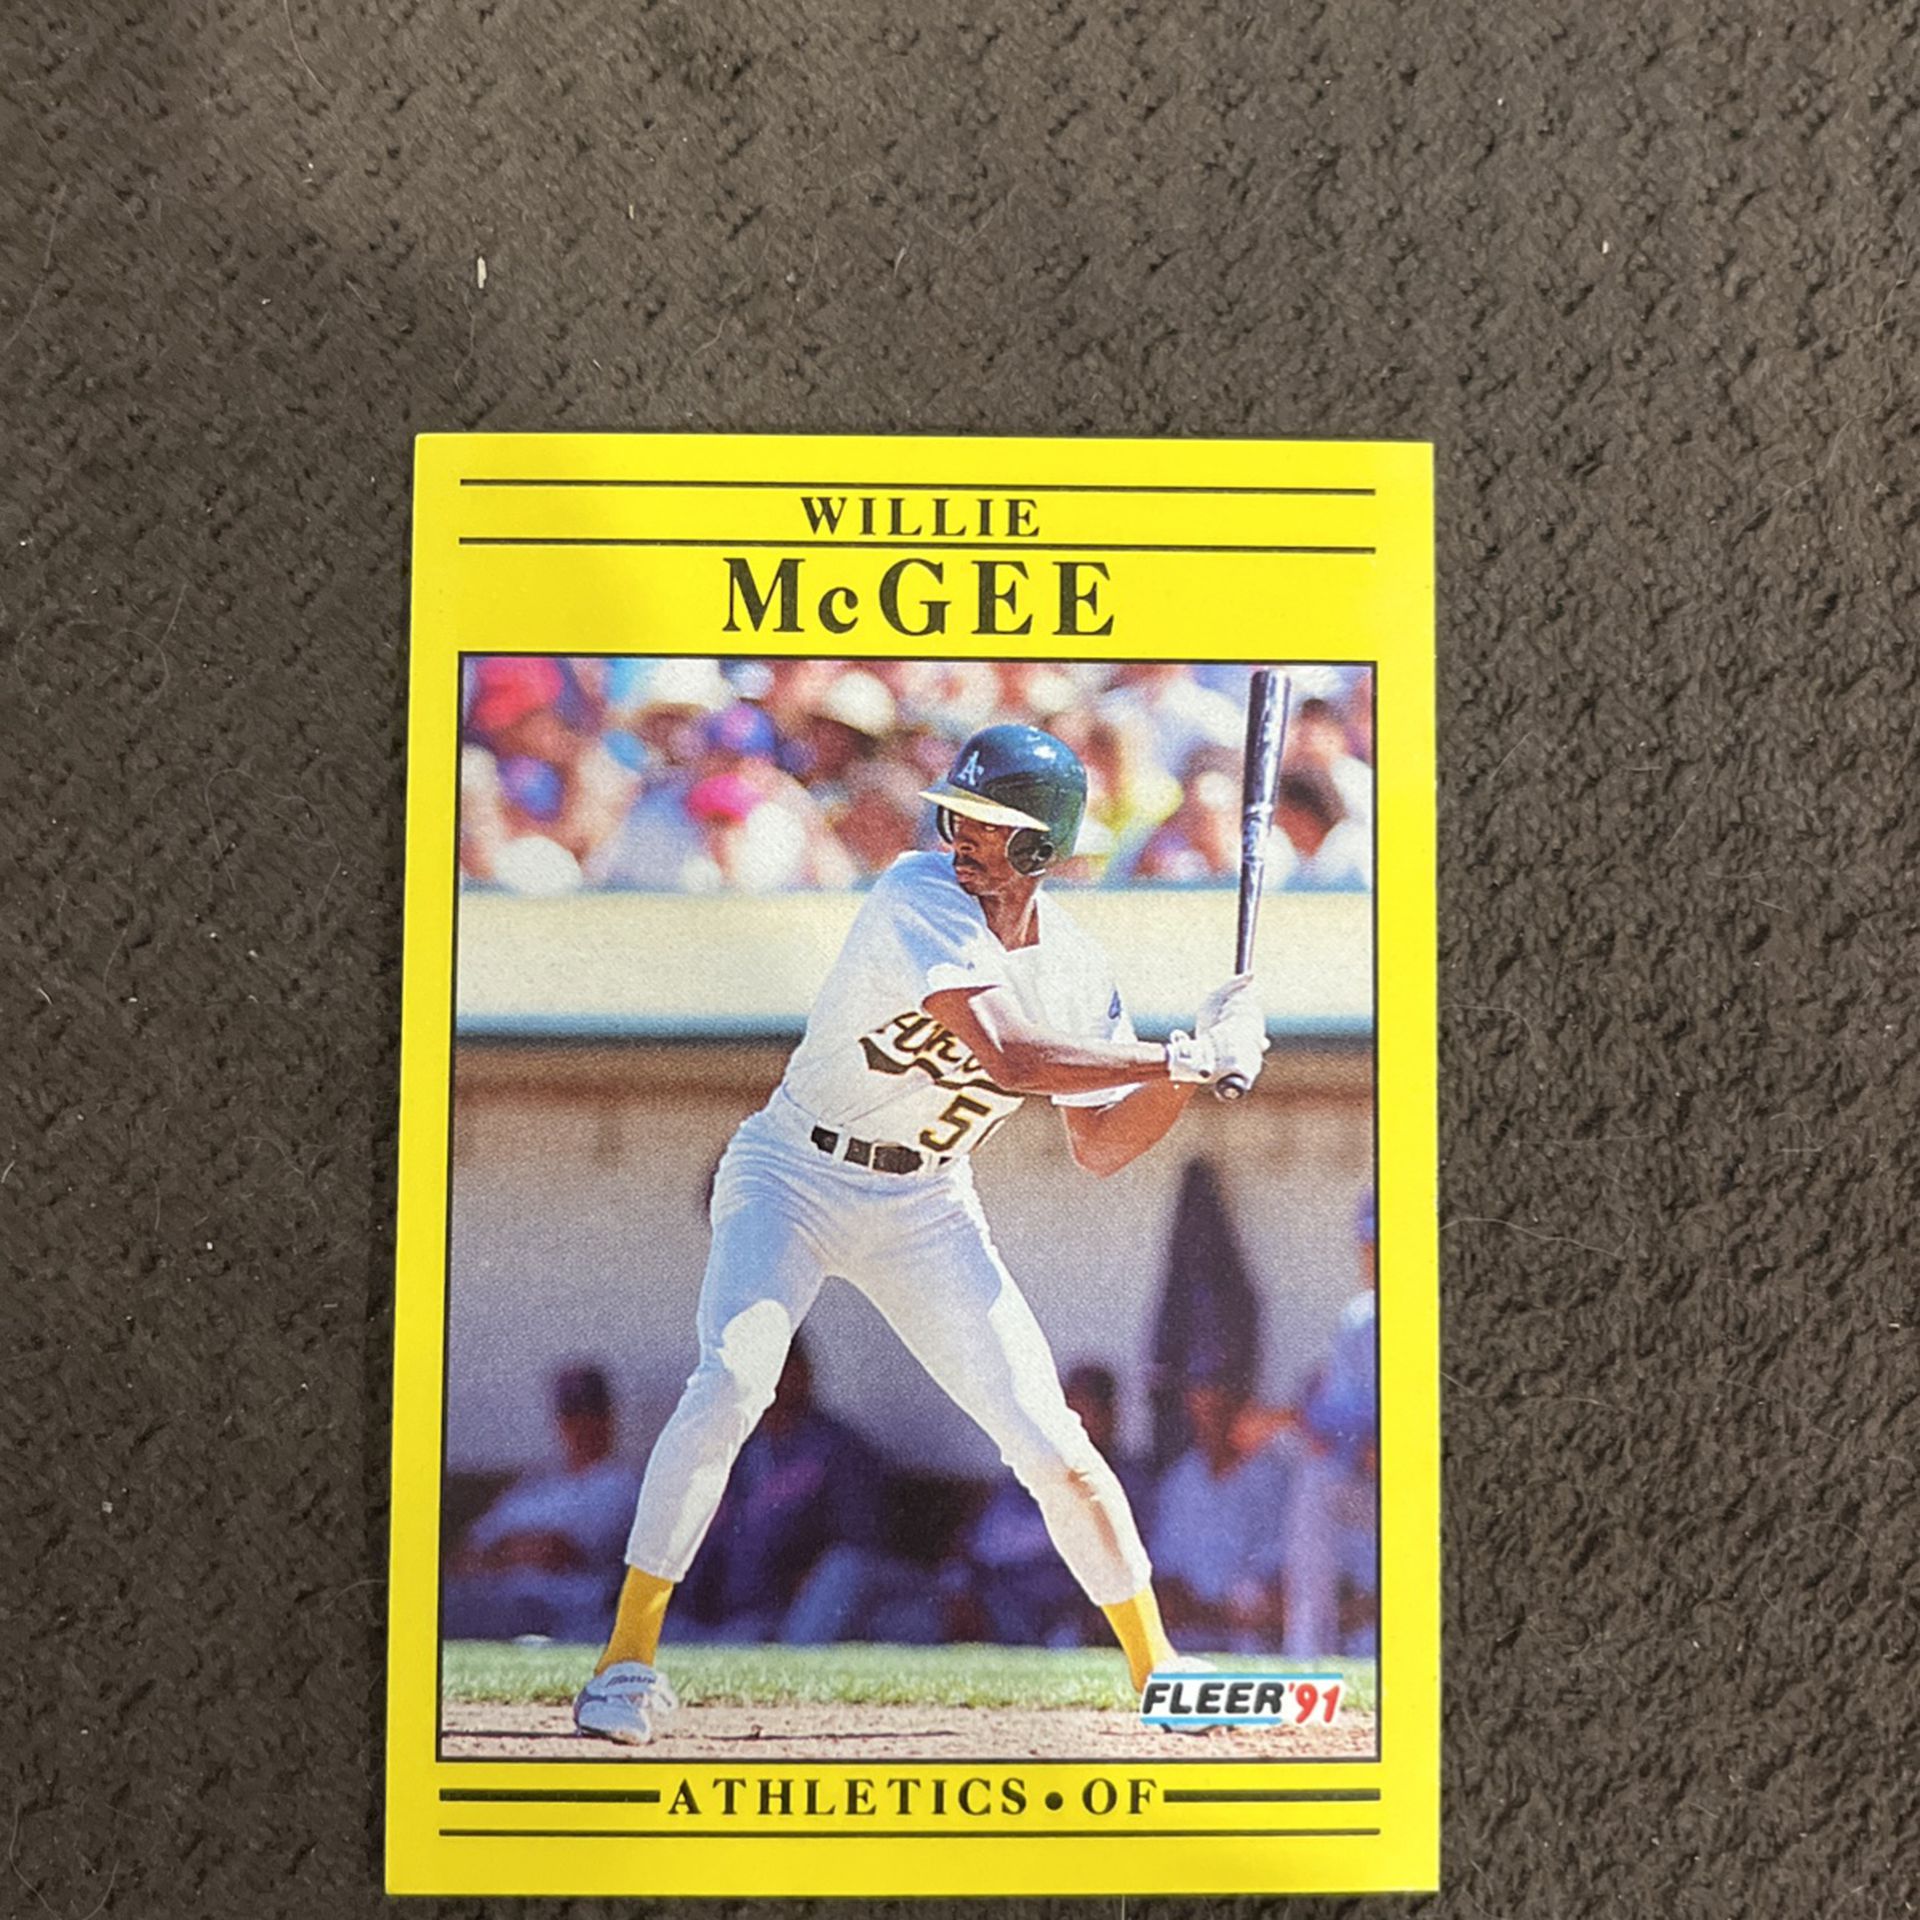 Baseball Card Willie McGee ERROR Card for Sale in West Covina